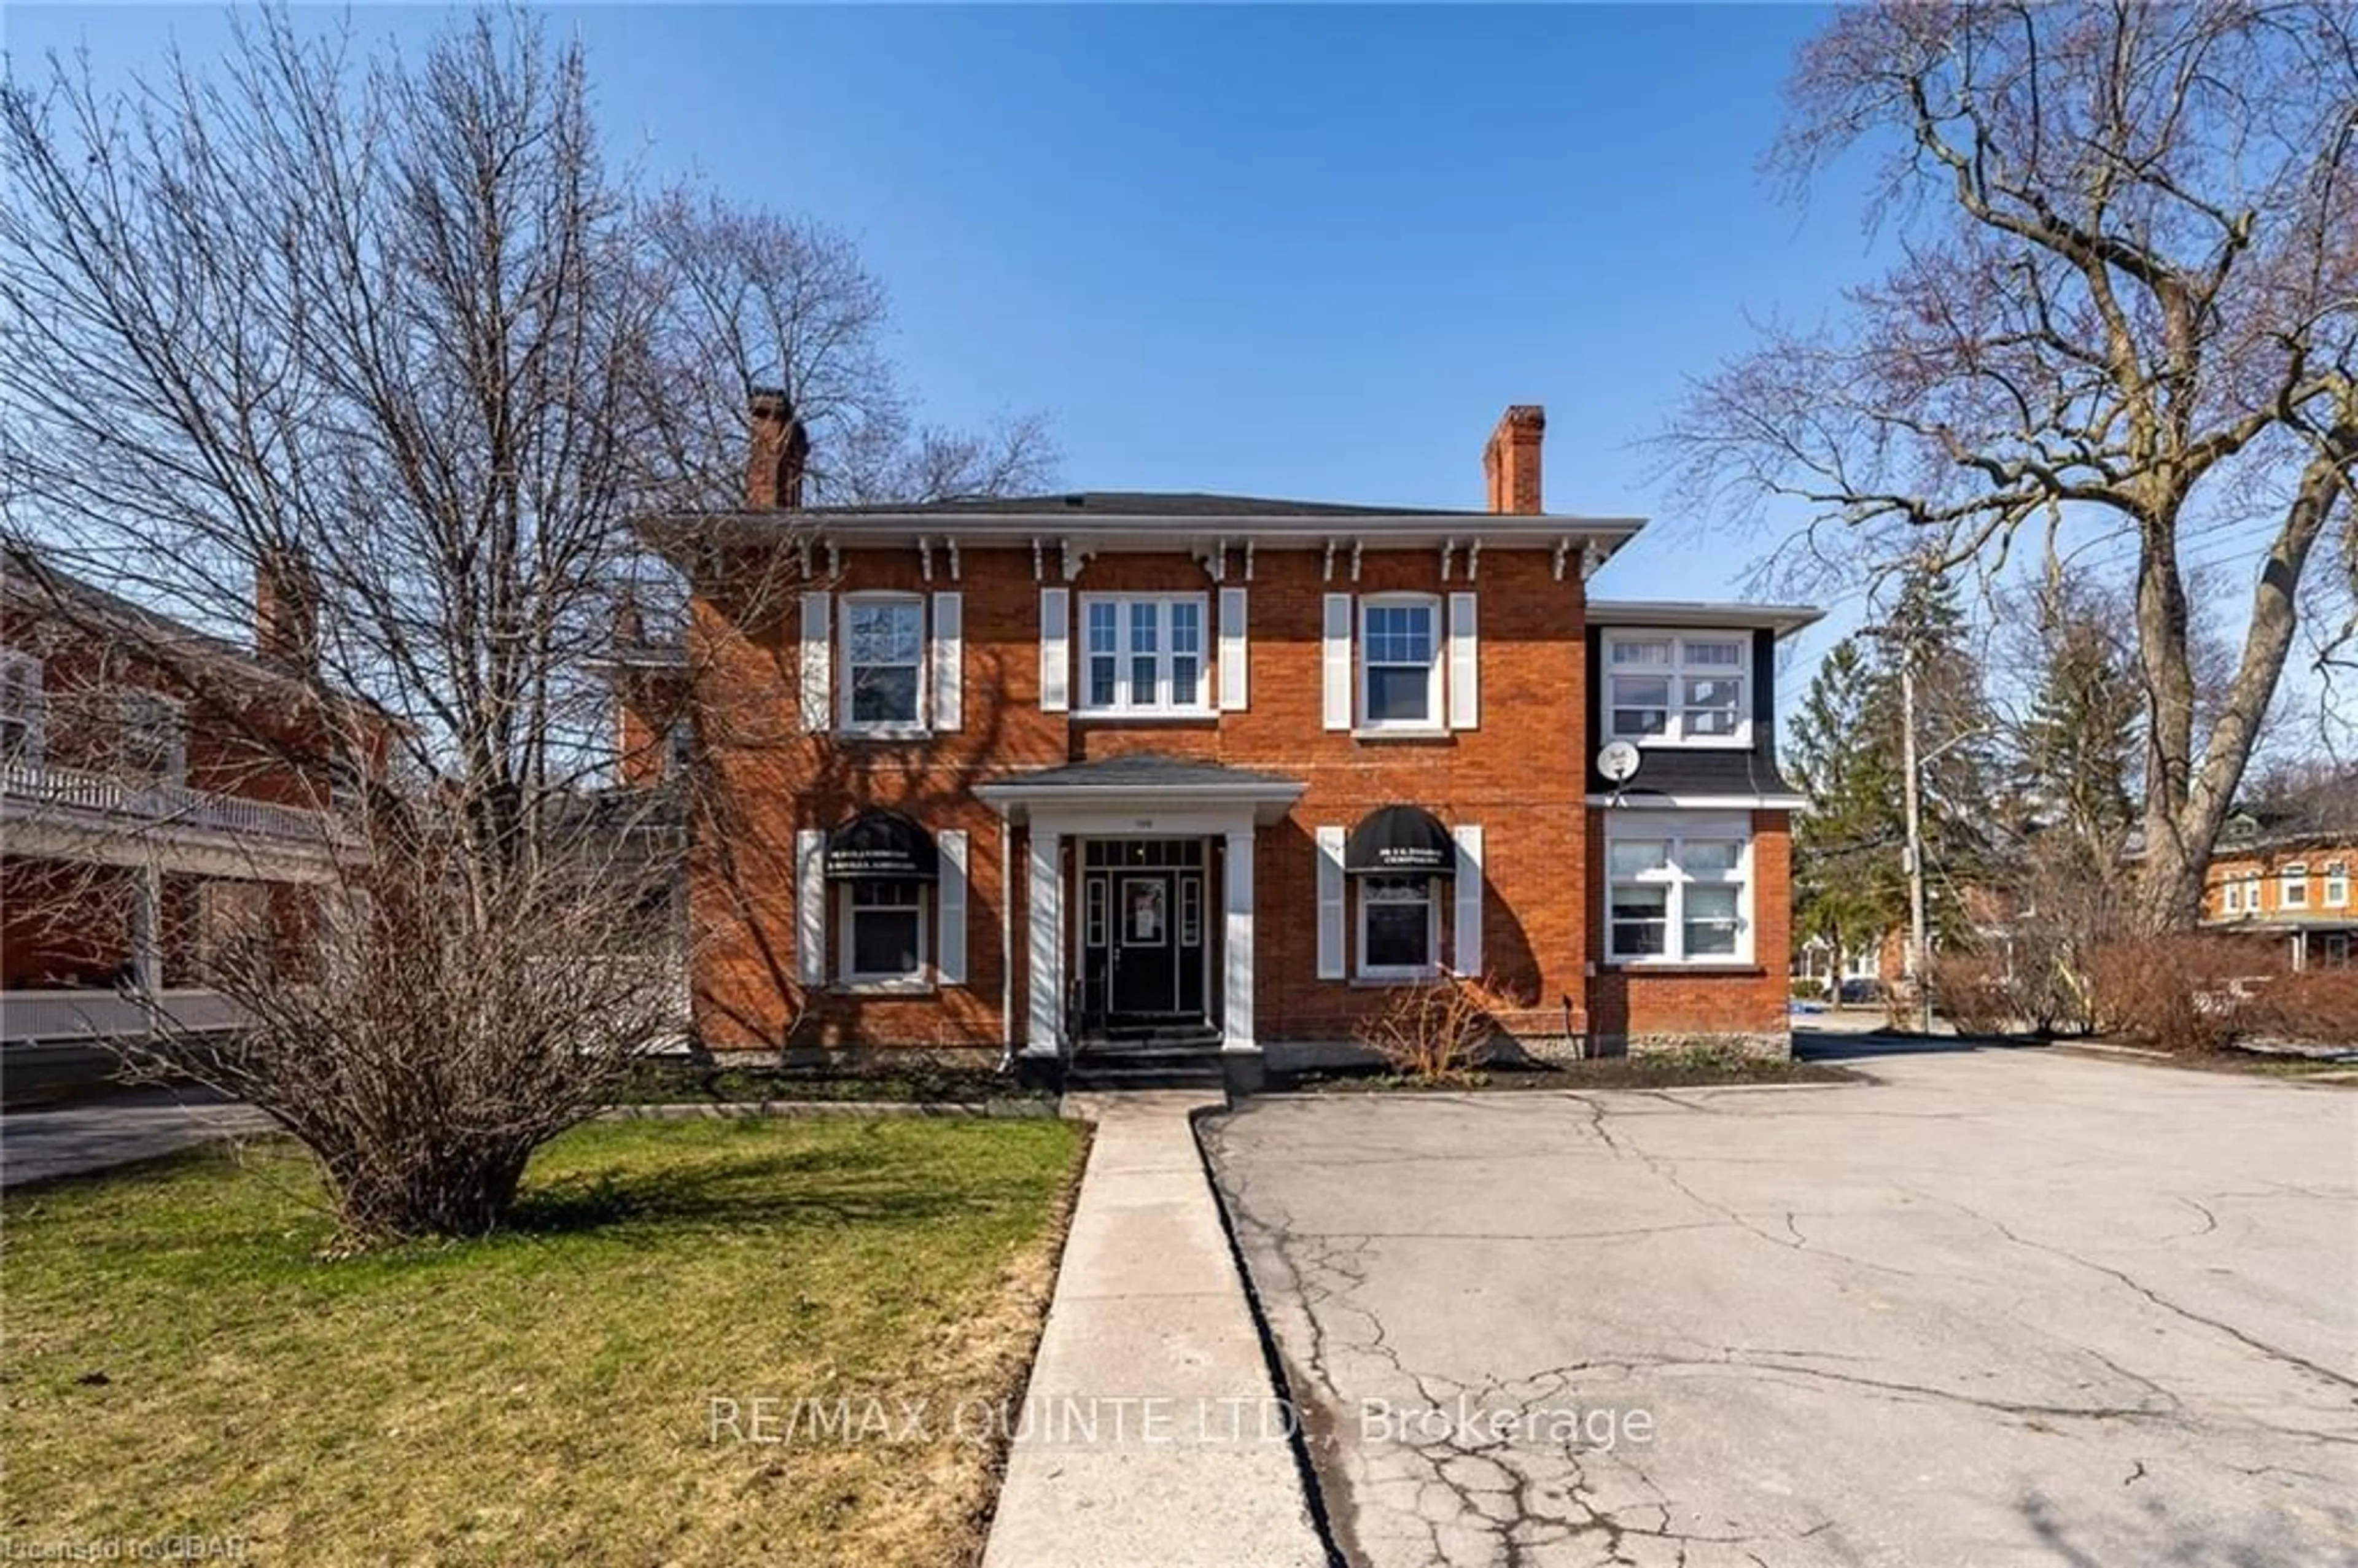 Home with brick exterior material for 156 Bridge St, Belleville Ontario K8N 1M9